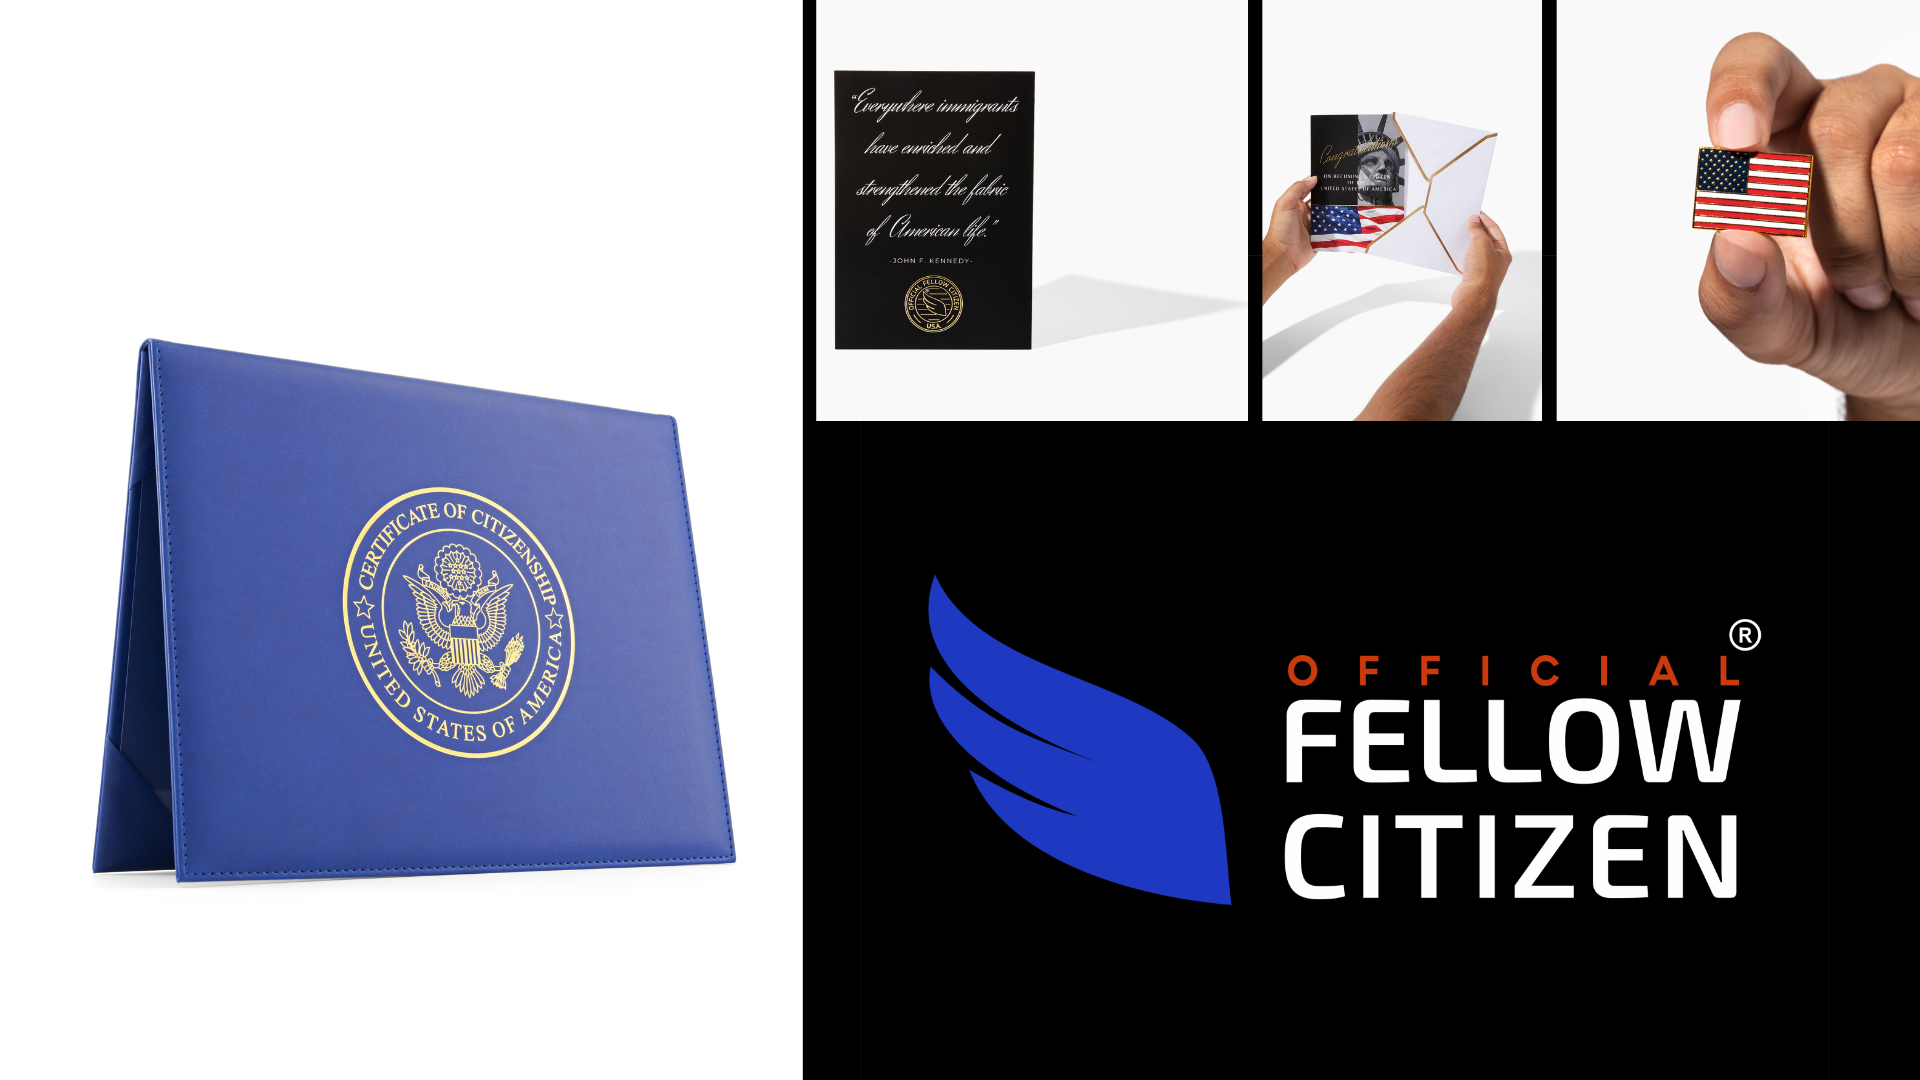 Image of What's Your American Dream story contest prizes: US Citizenship Certificate Holder, Greeting Card, Gold American Flag Lapel Pin